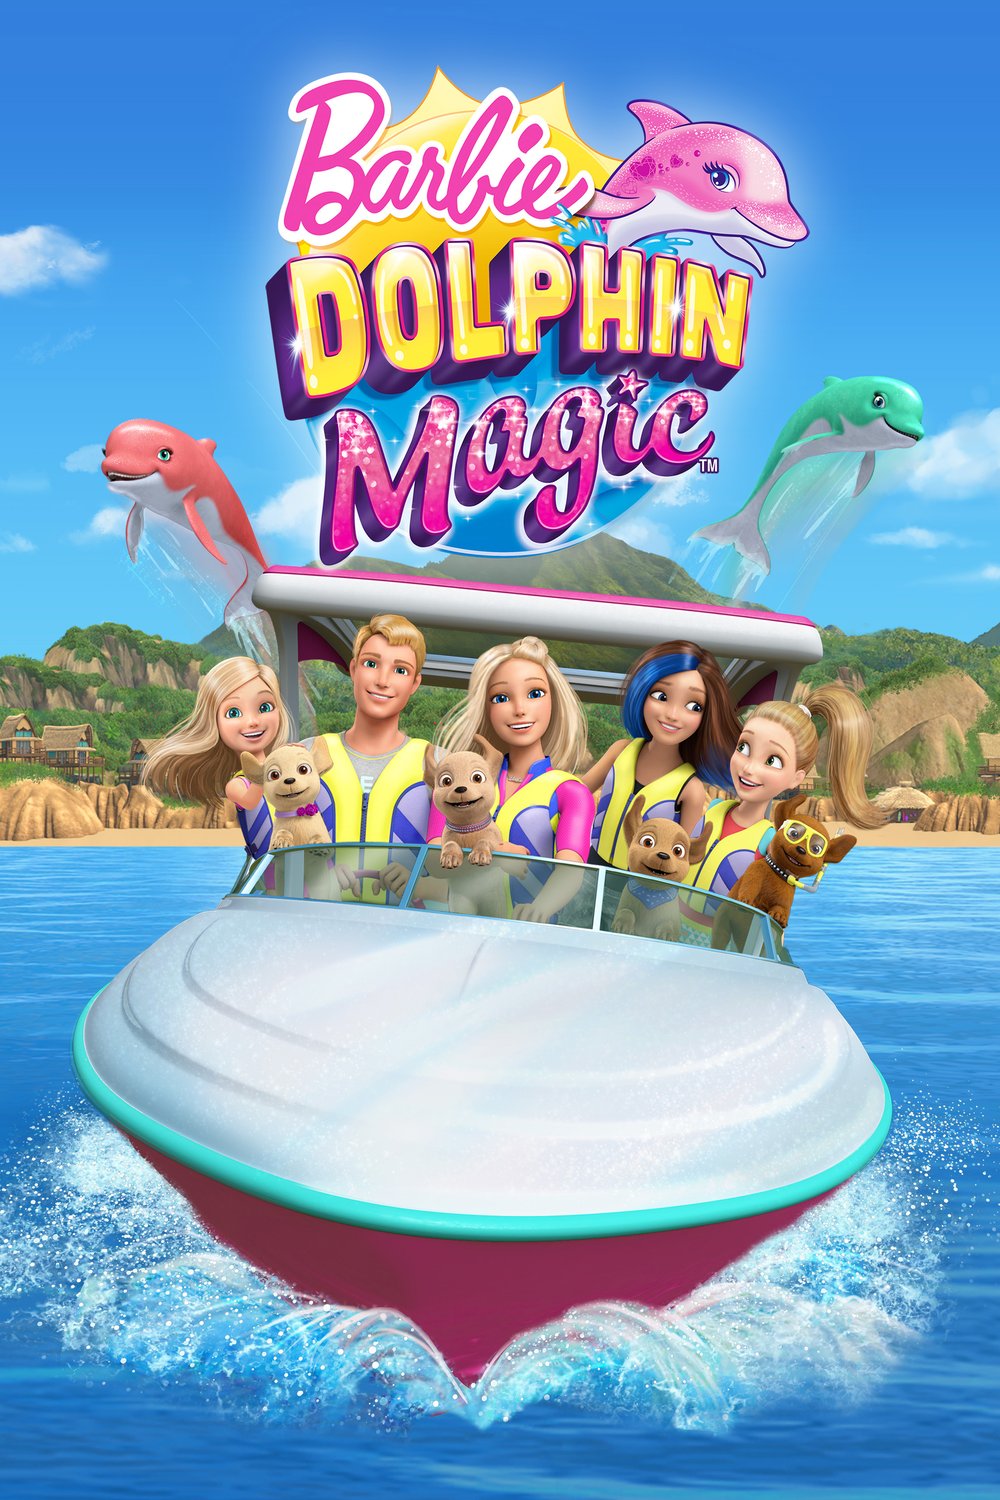 Poster of the movie Barbie: Dolphin Magic